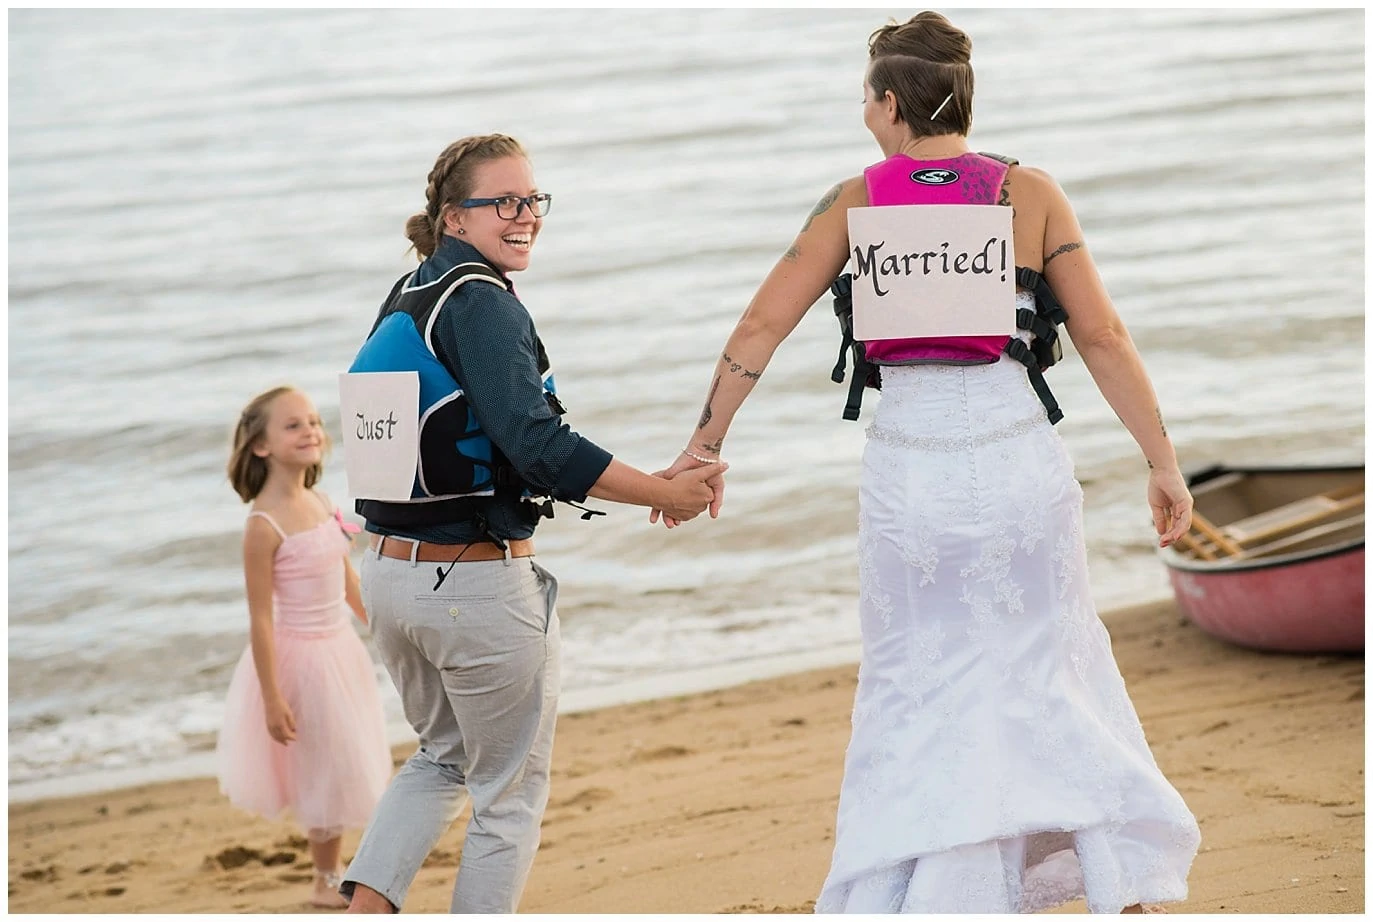 just married life vests photo